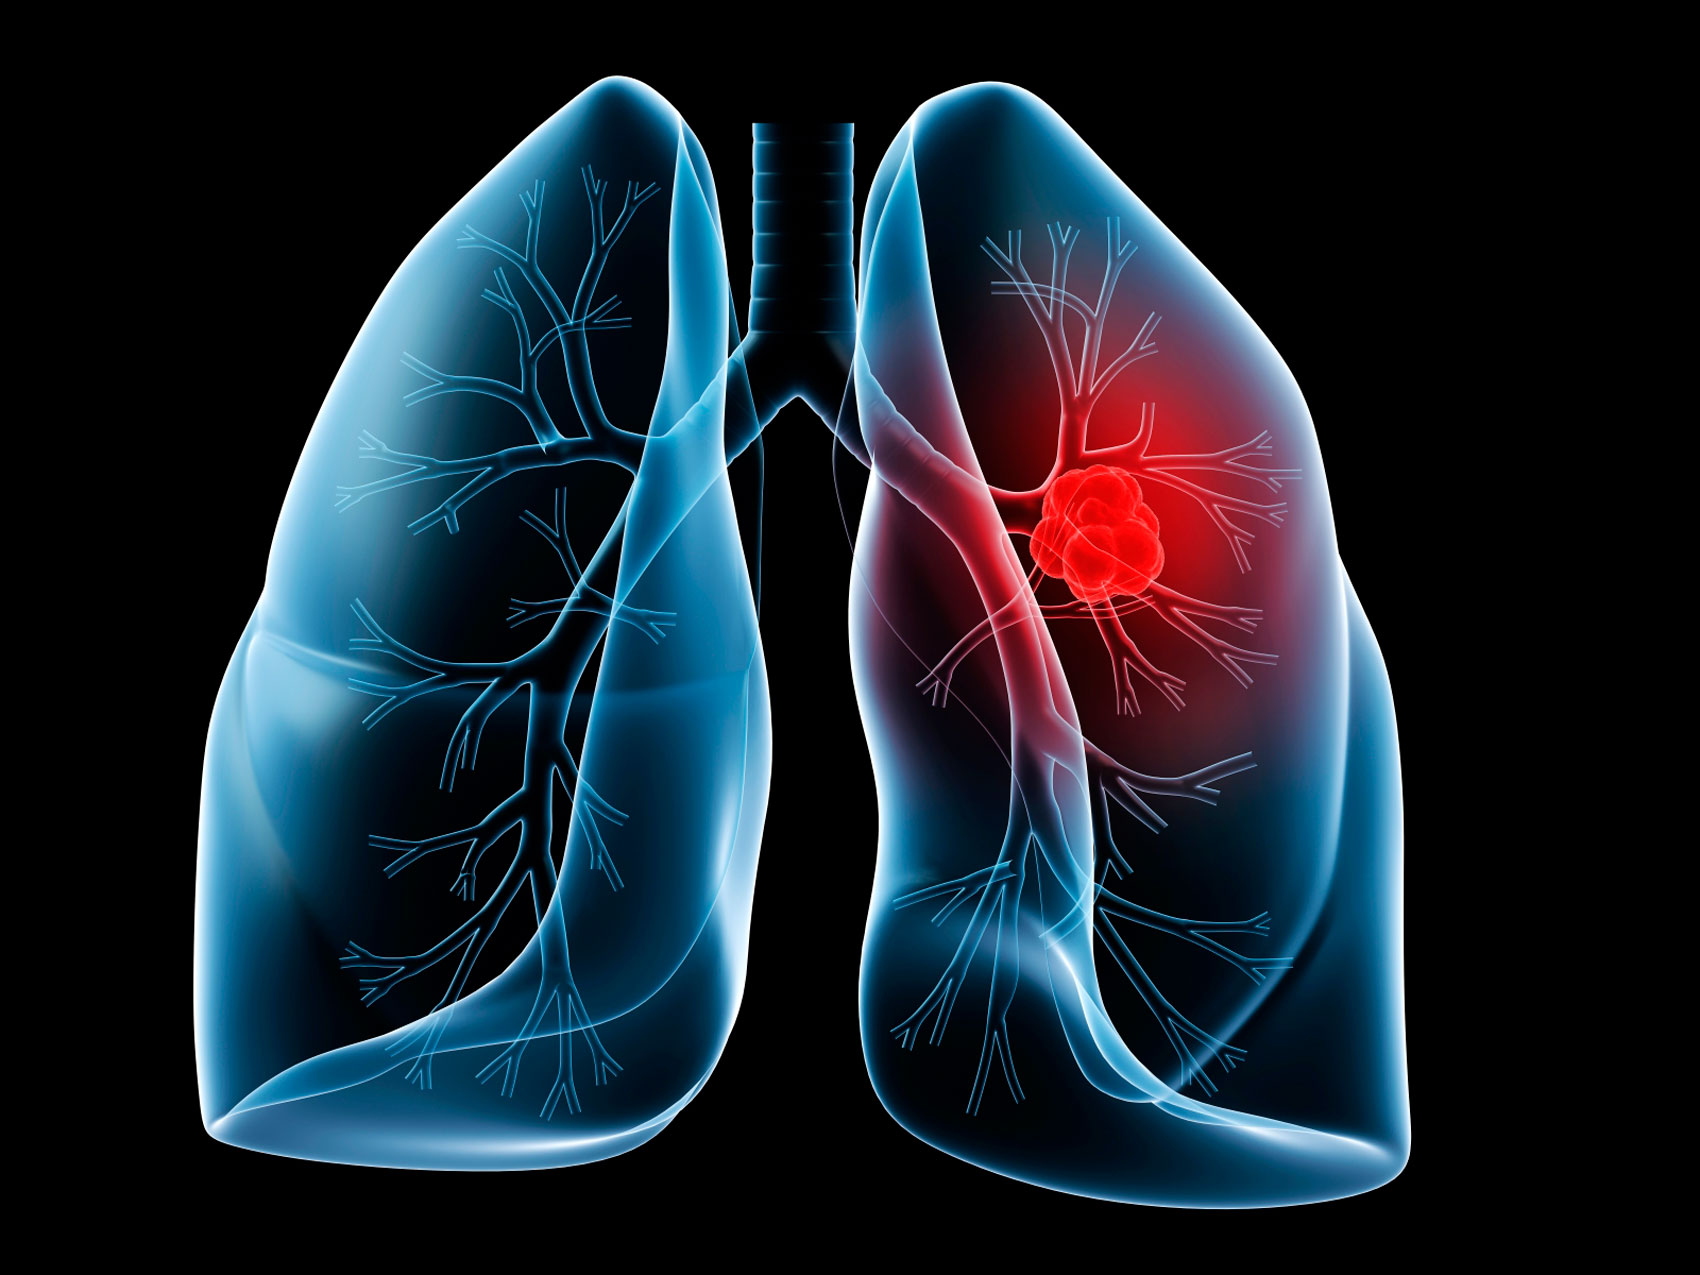 Non-Smoking Related Risk Factors for Lung Cancer